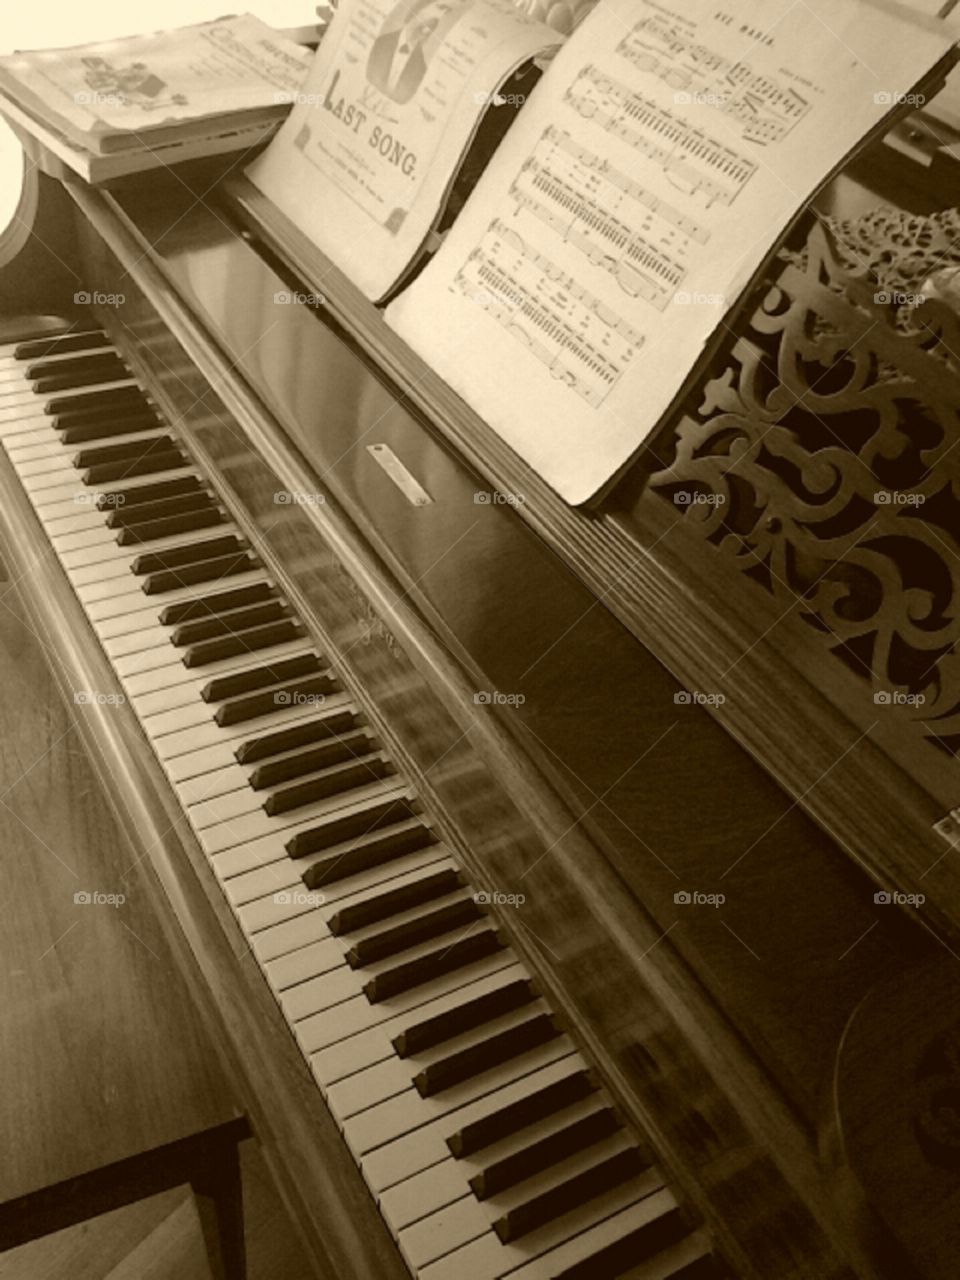 My Old Piano